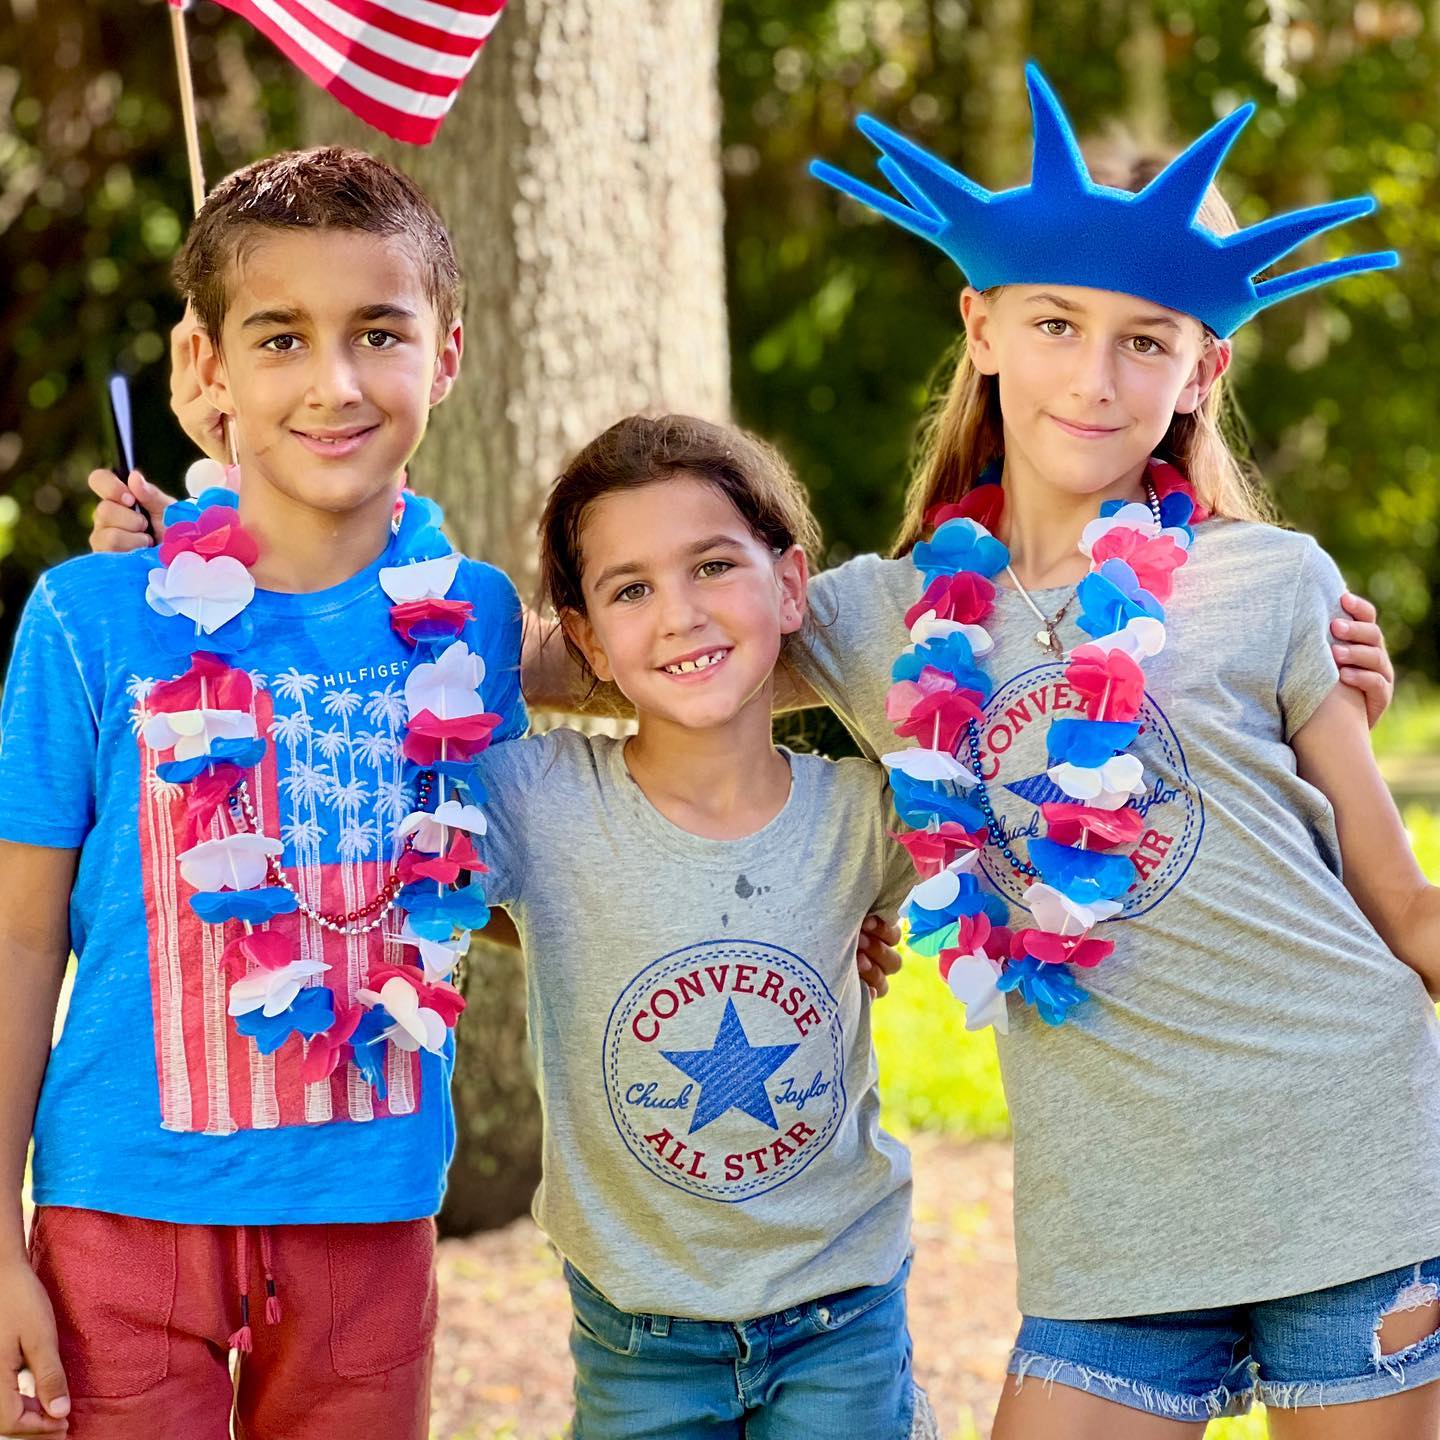 HAPPY 4TH!⁣
💙🤍❤️⁣
I hope everyone had a fun-filled day and found a little bit of normalcy back this year. ⁣
⁣
🎇 After two years without, our little town hosted its yearly fireworks, and for a moment, life felt normal. ⁣
⁣
☀️ Onto our last month of summer break! School starts in just over a month and we’ll be enjoying the next few weeks as much as we can! ⁣
⁣
🎆 We’re celebrating Mark’s birthday in a fun place this week and we can’t wait to take you with us!!